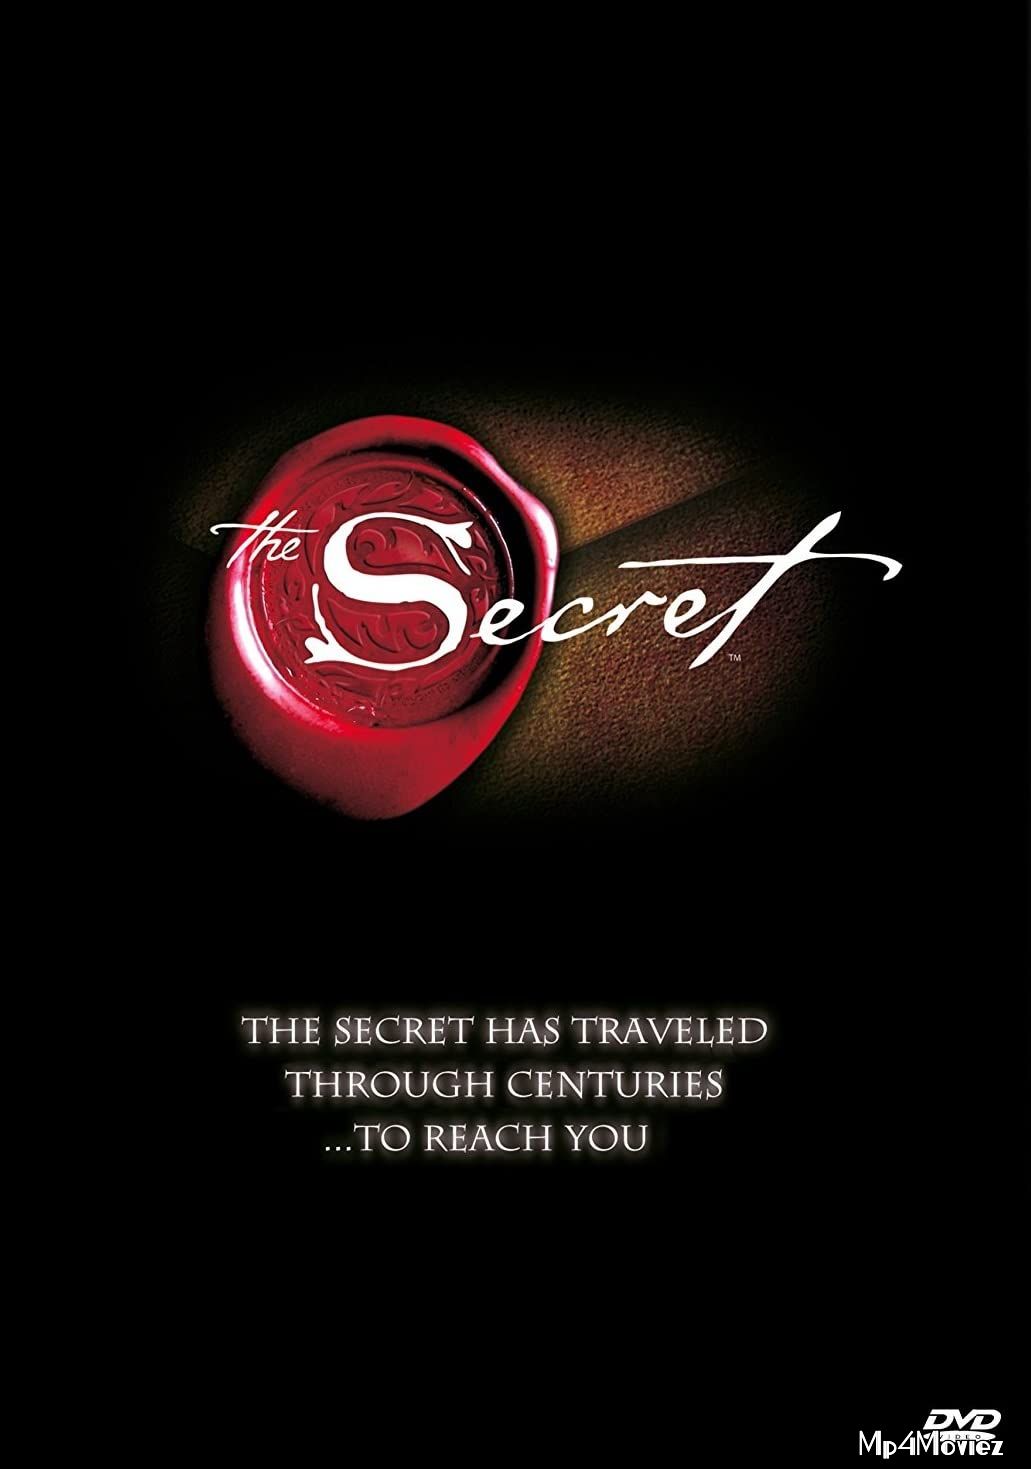 The Secret (2006) Hindi Dubbed DVDRip download full movie